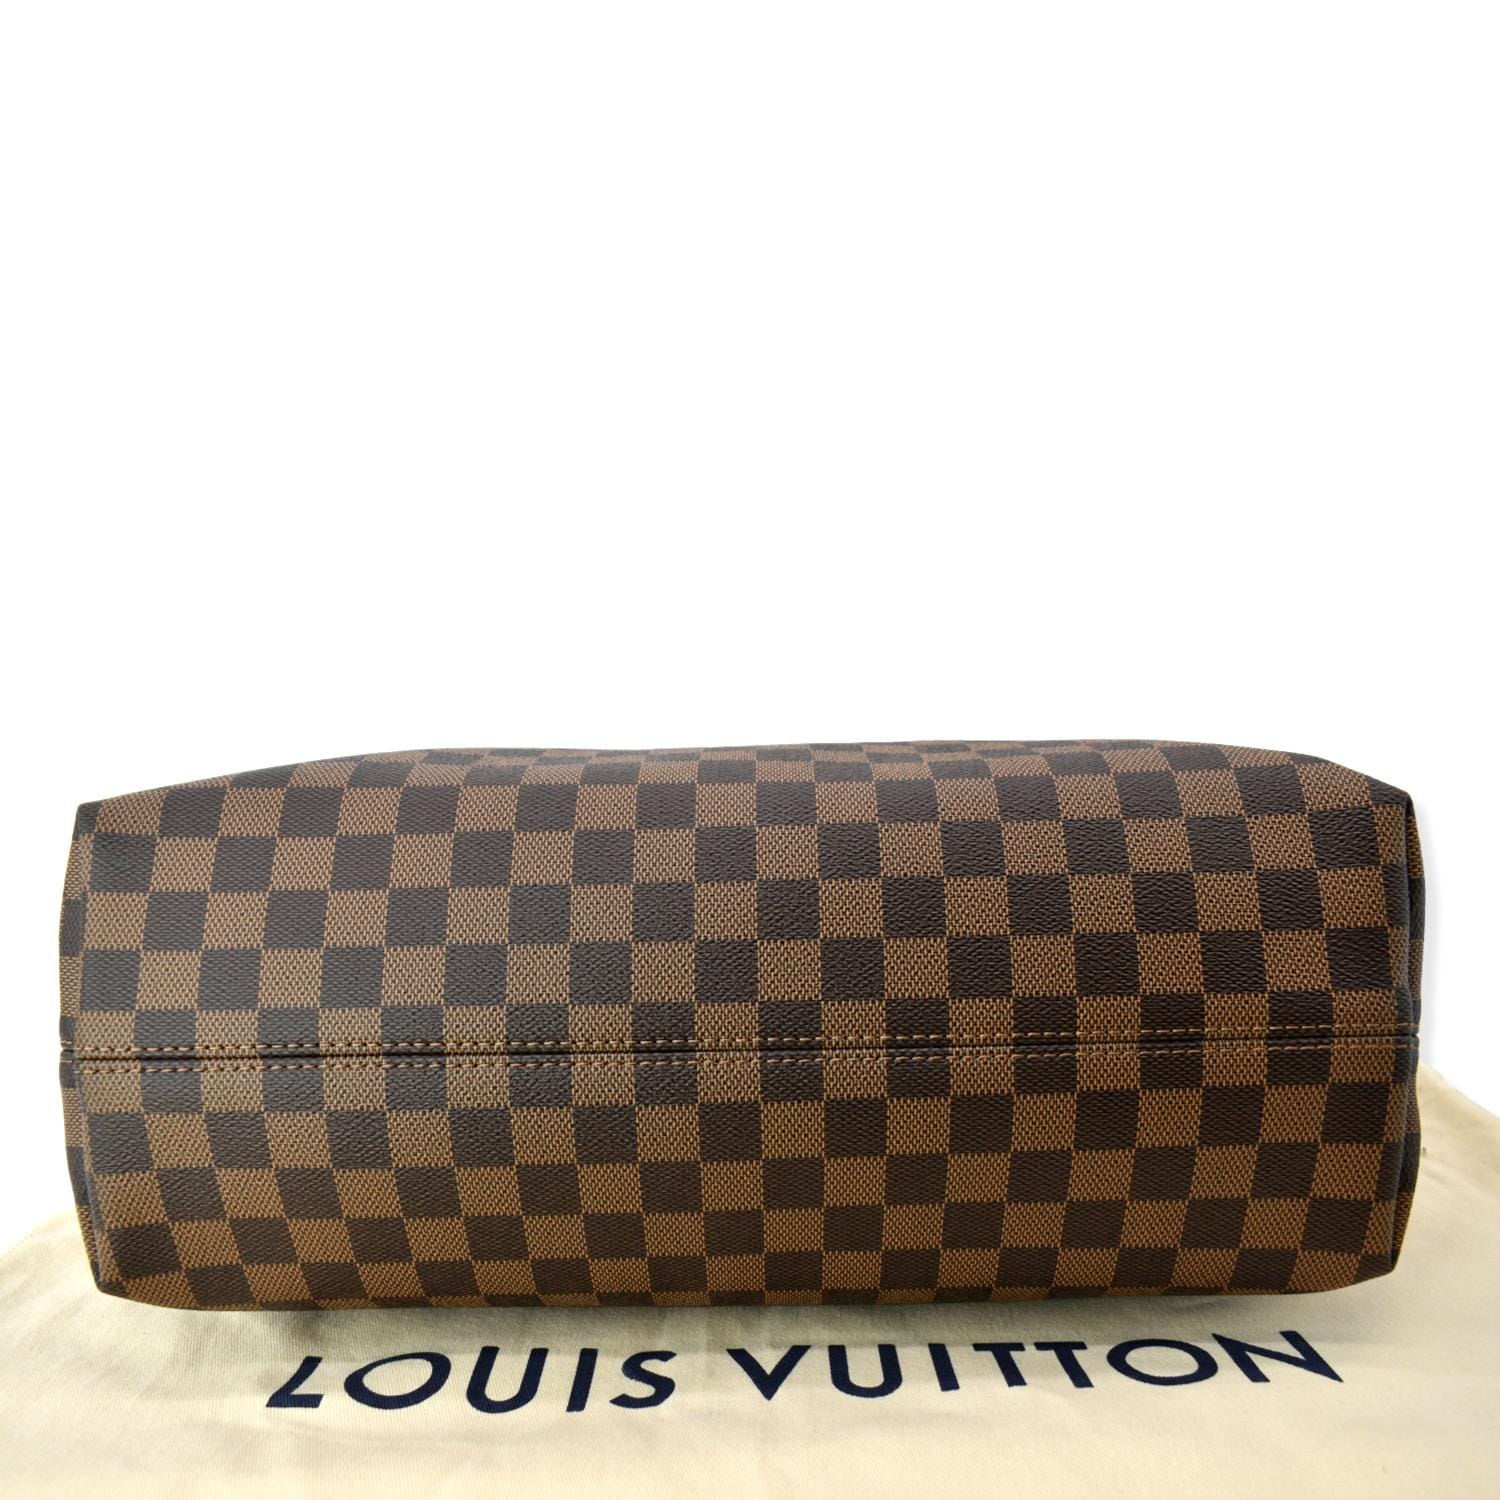 This Louis Vuitton iPhone case will cost you $5500